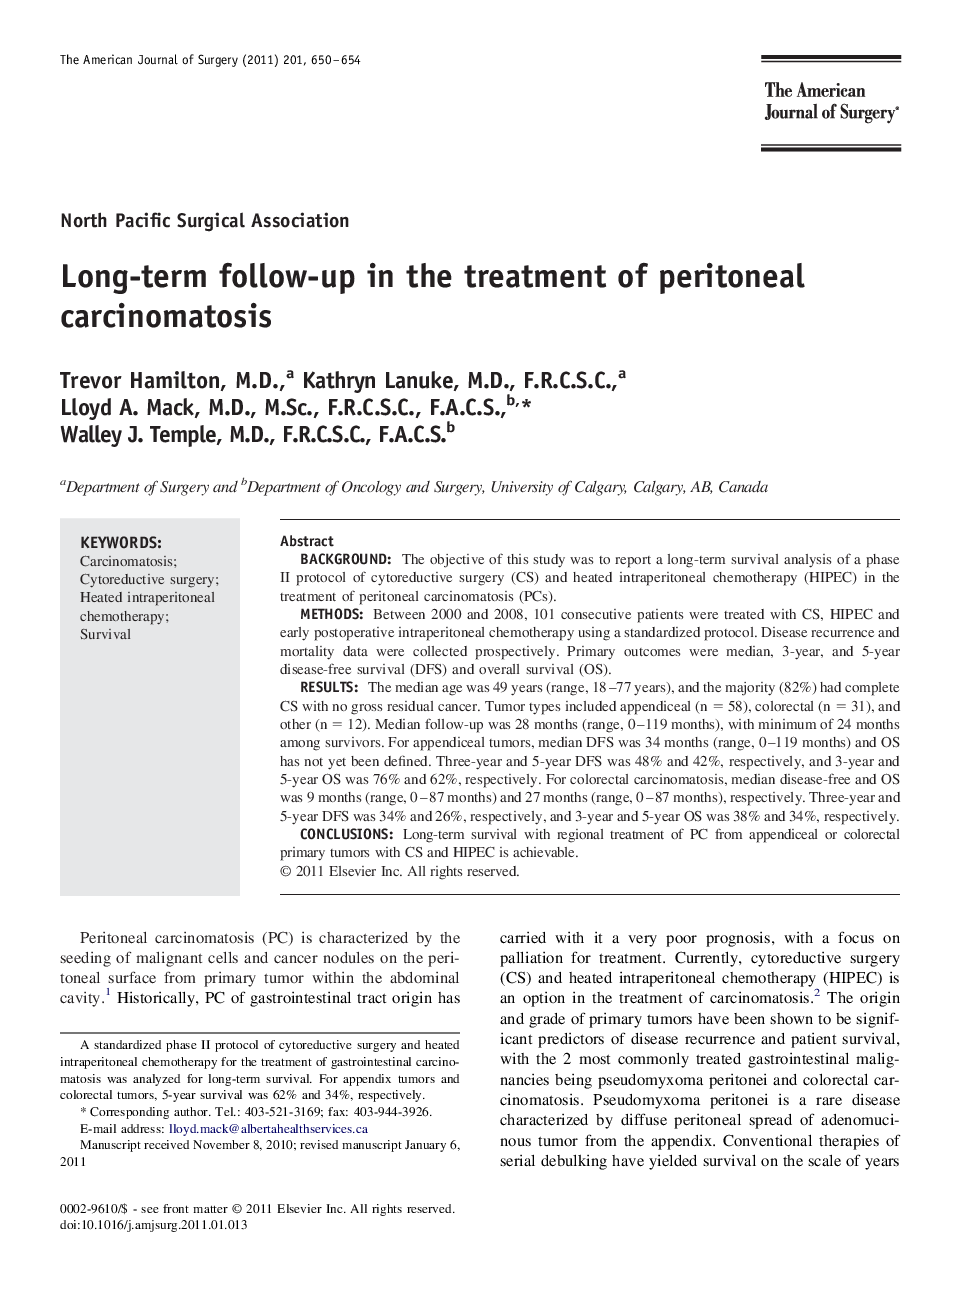 Long-term follow-up in the treatment of peritoneal carcinomatosis 